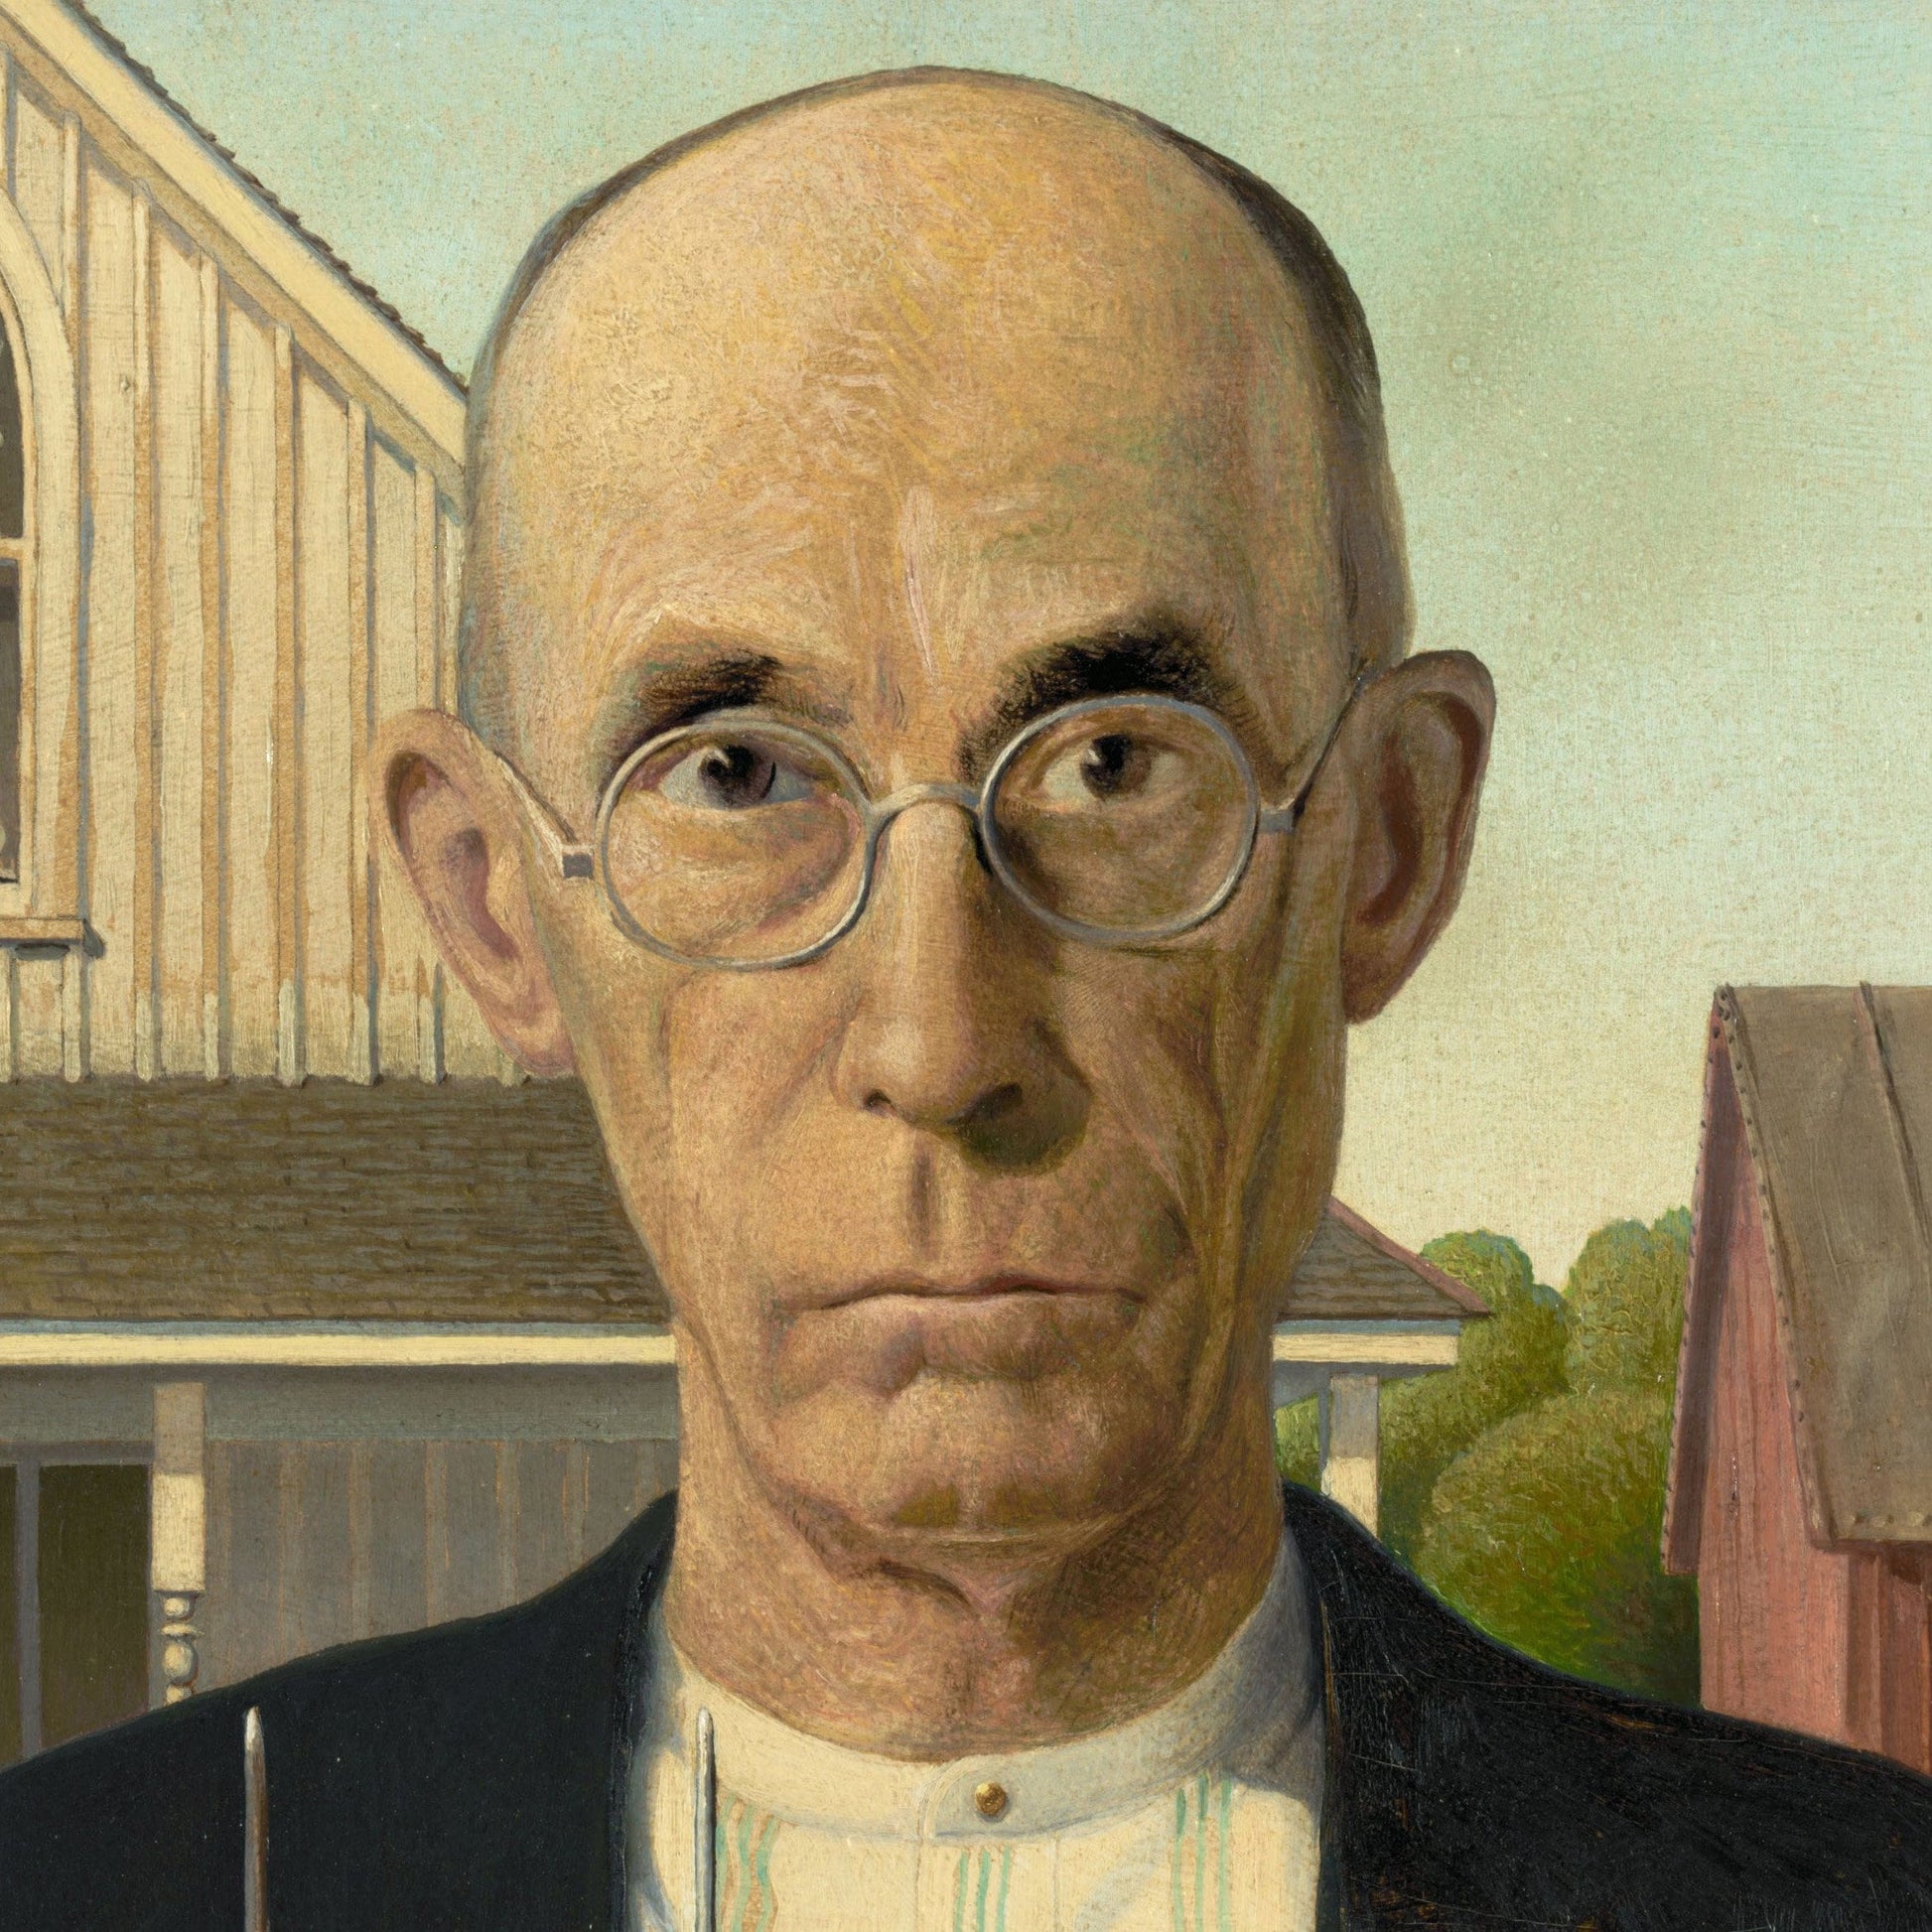 American Gothic by Grant Wood, 3d Printed with texture and brush strokes looks like original oil-painting, code:030